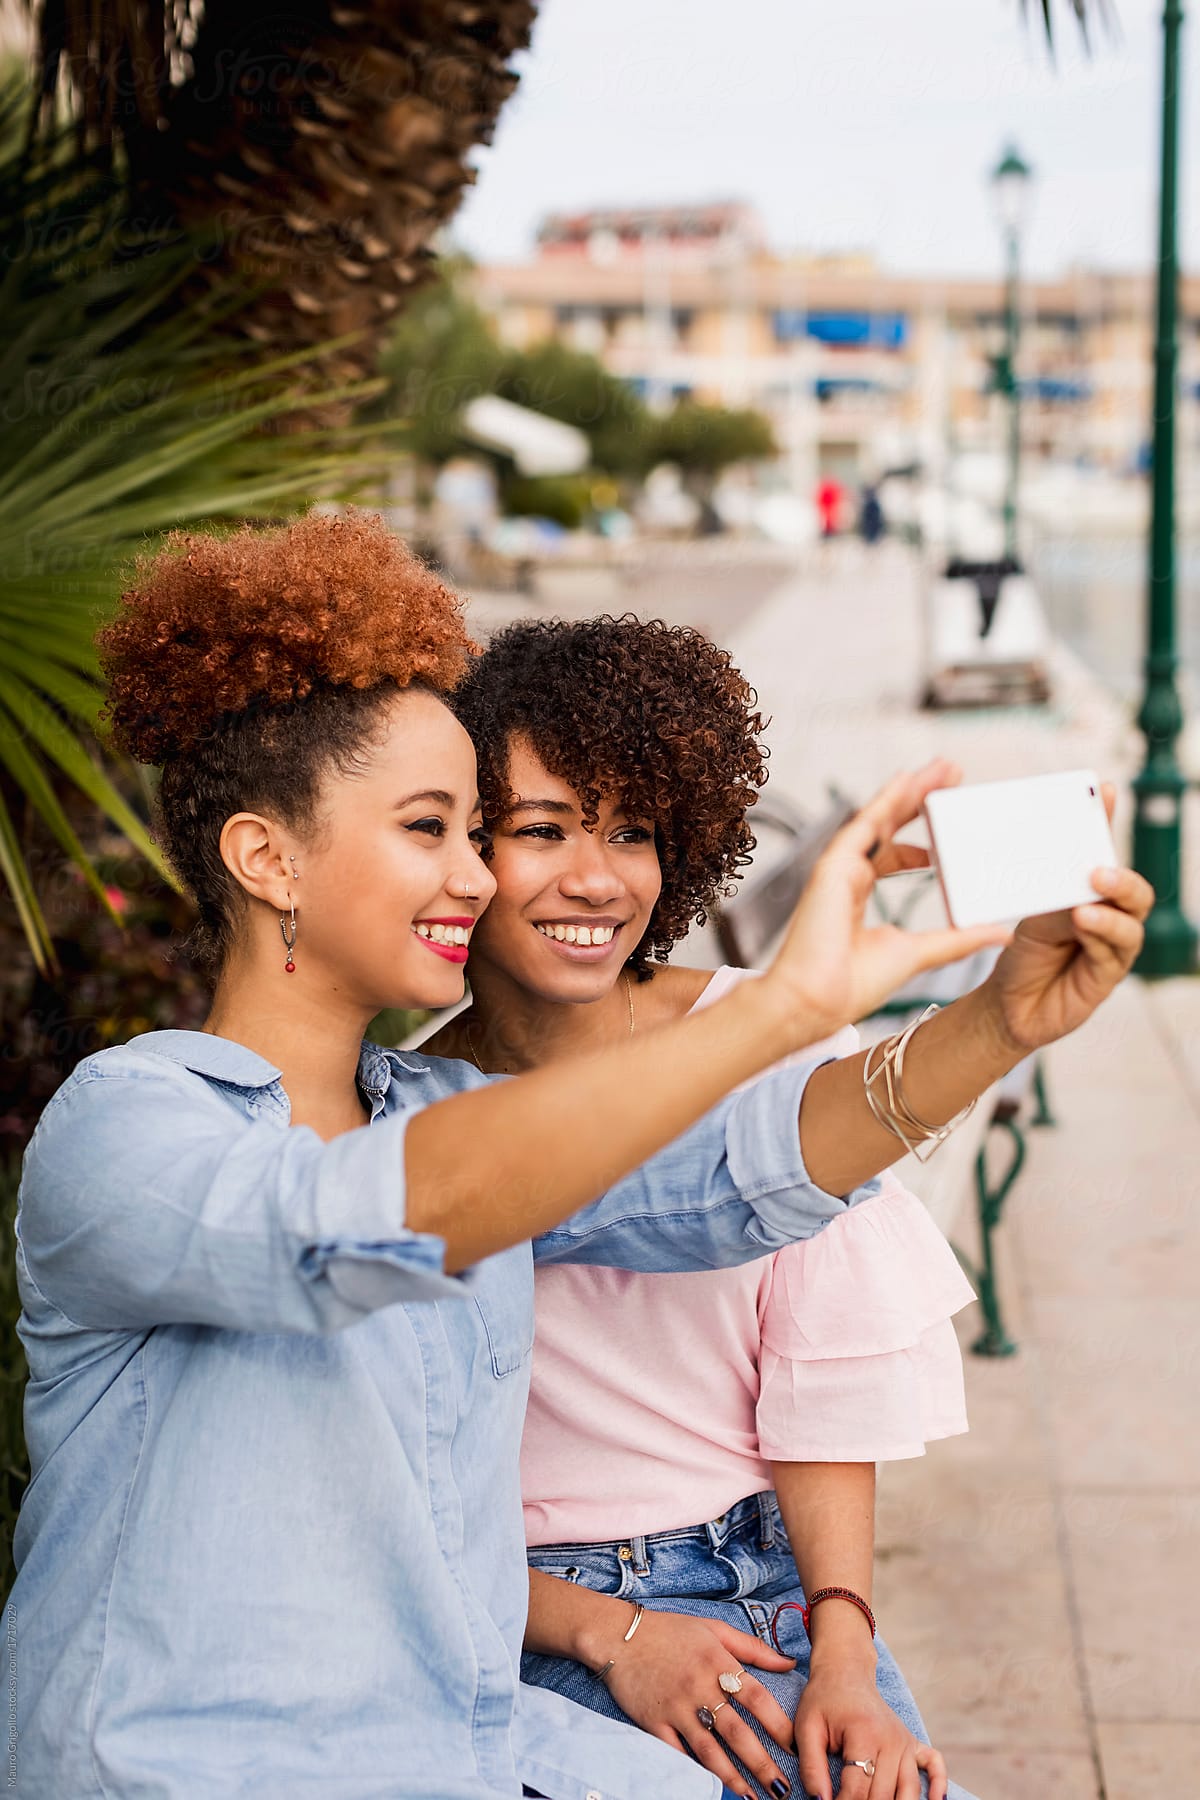 Afro women using a mobile phone for a selfie